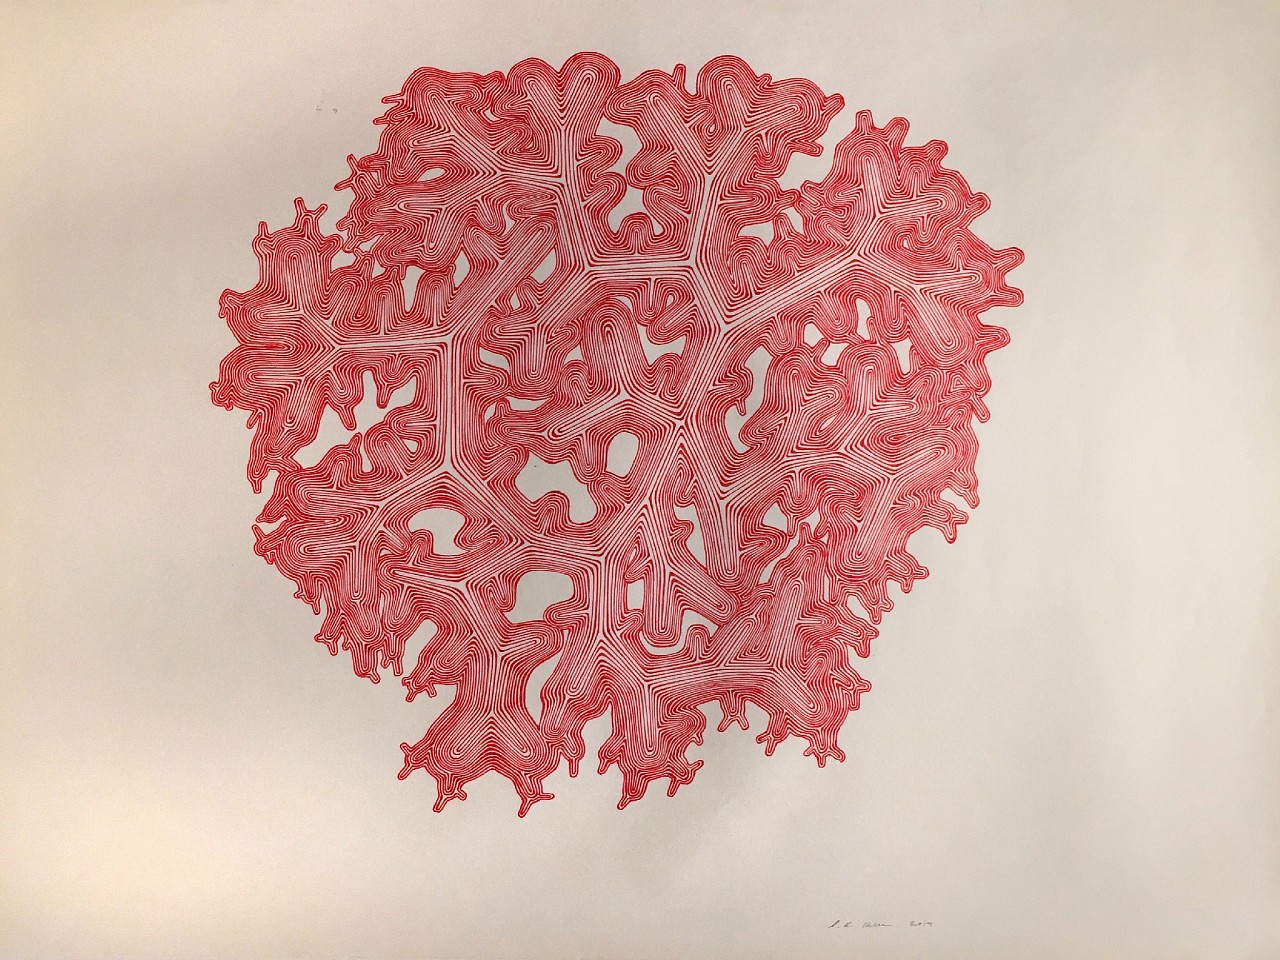 Stewart Helm, Red Snow Flake, 2019
colored inks on paper, 20" x 27.5" unframed 
SH-611
$3,600